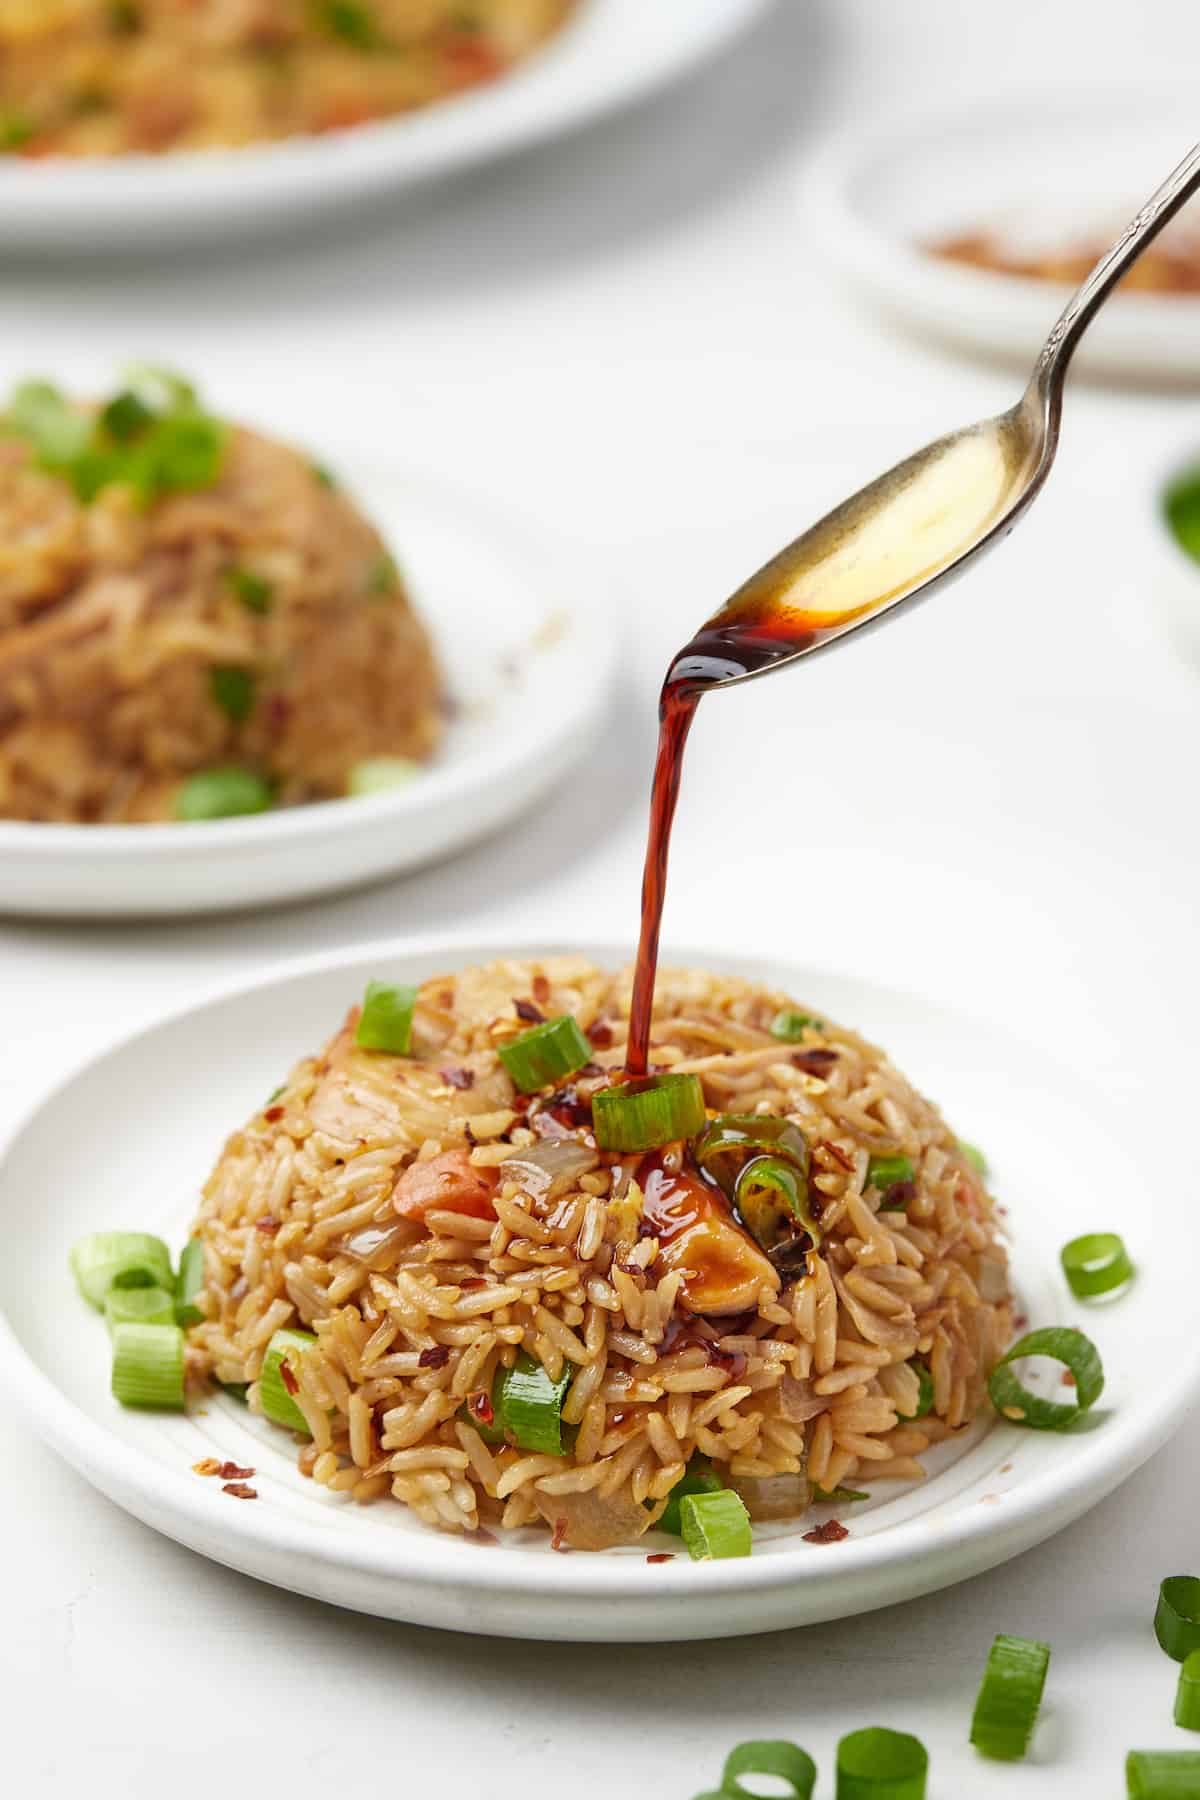 Extra soy sauce being spooned over a pile of fried rice on a small plate.